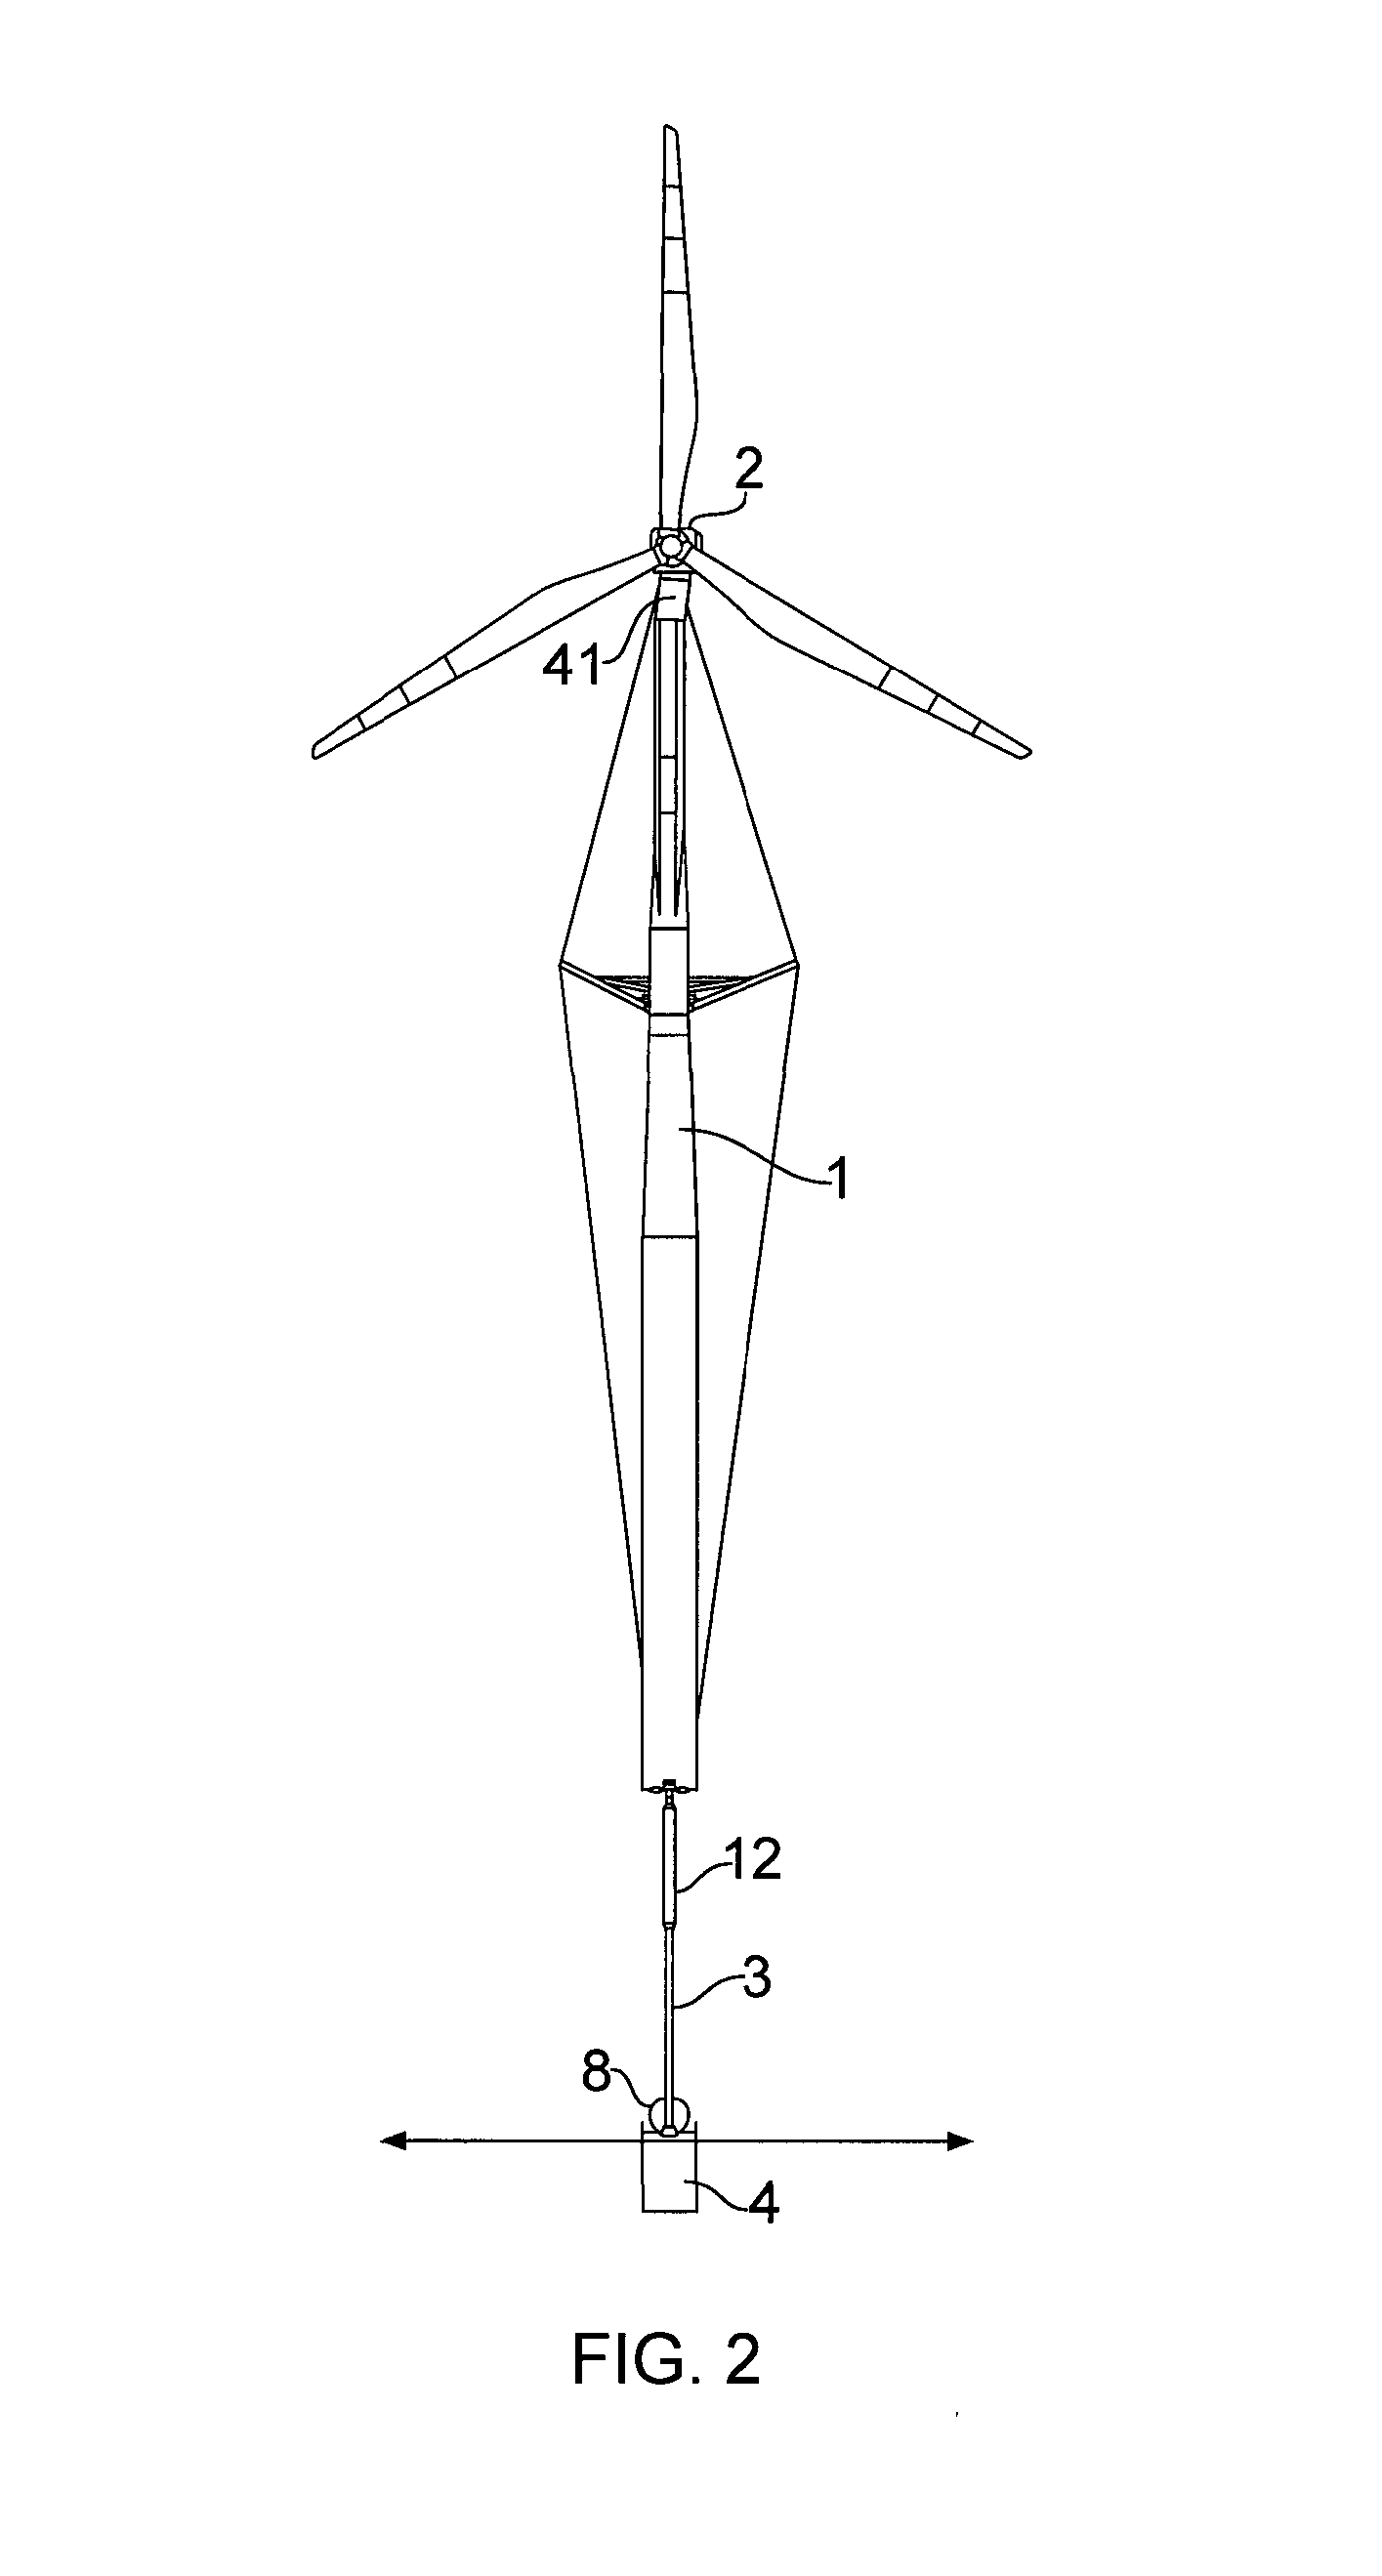 Offshore wind turbine generator connection arrangement and tower system